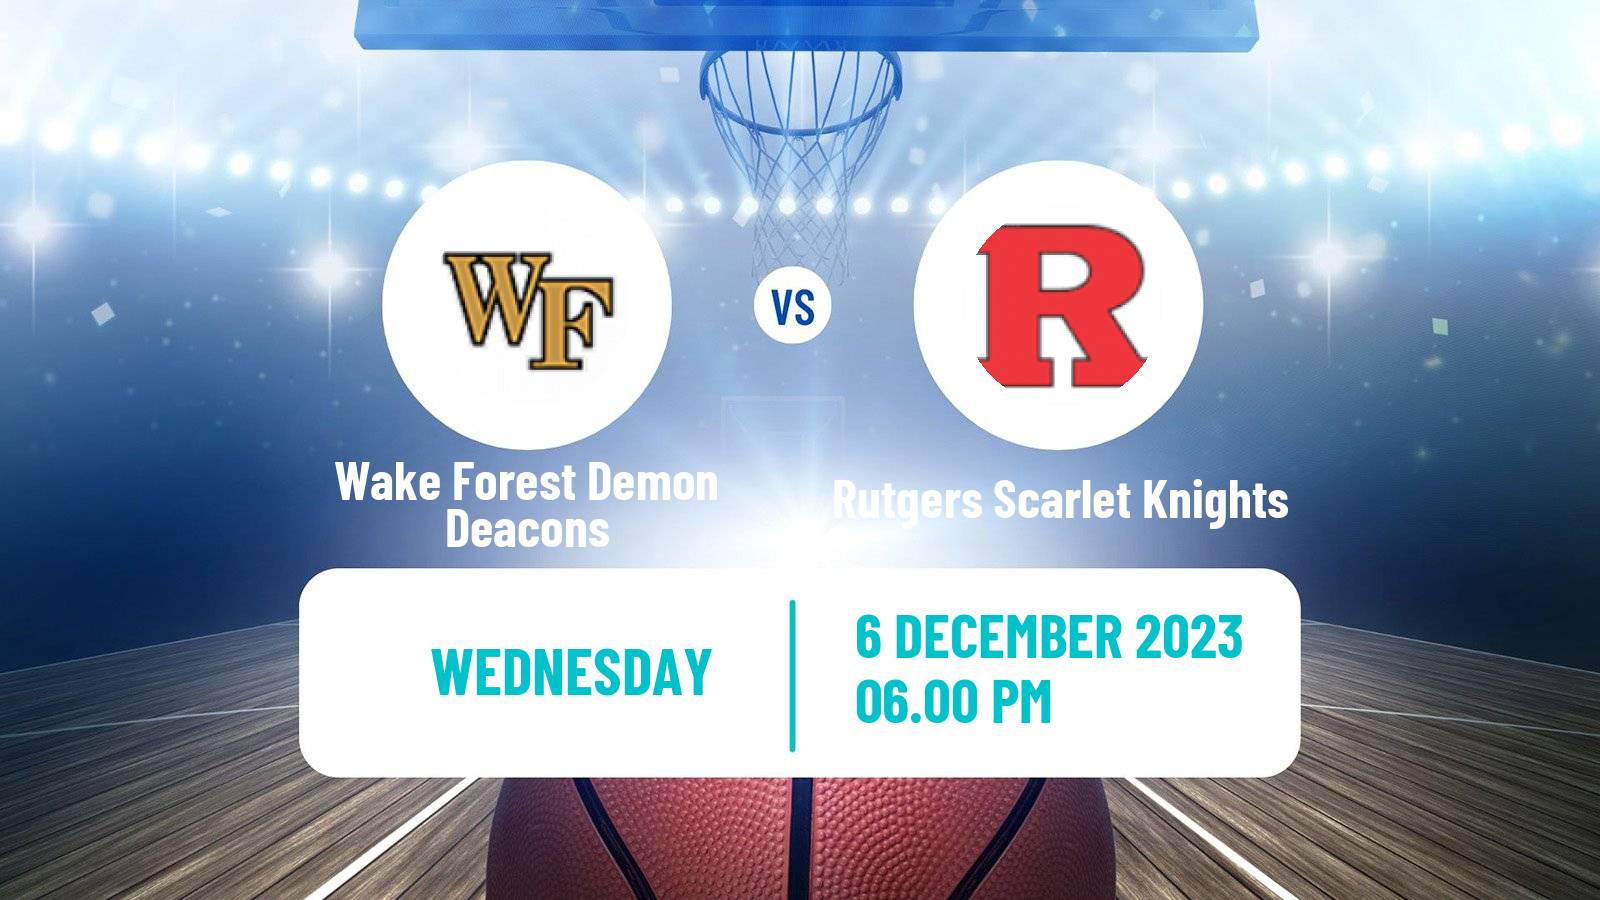 Basketball NCAA College Basketball Wake Forest Demon Deacons - Rutgers Scarlet Knights